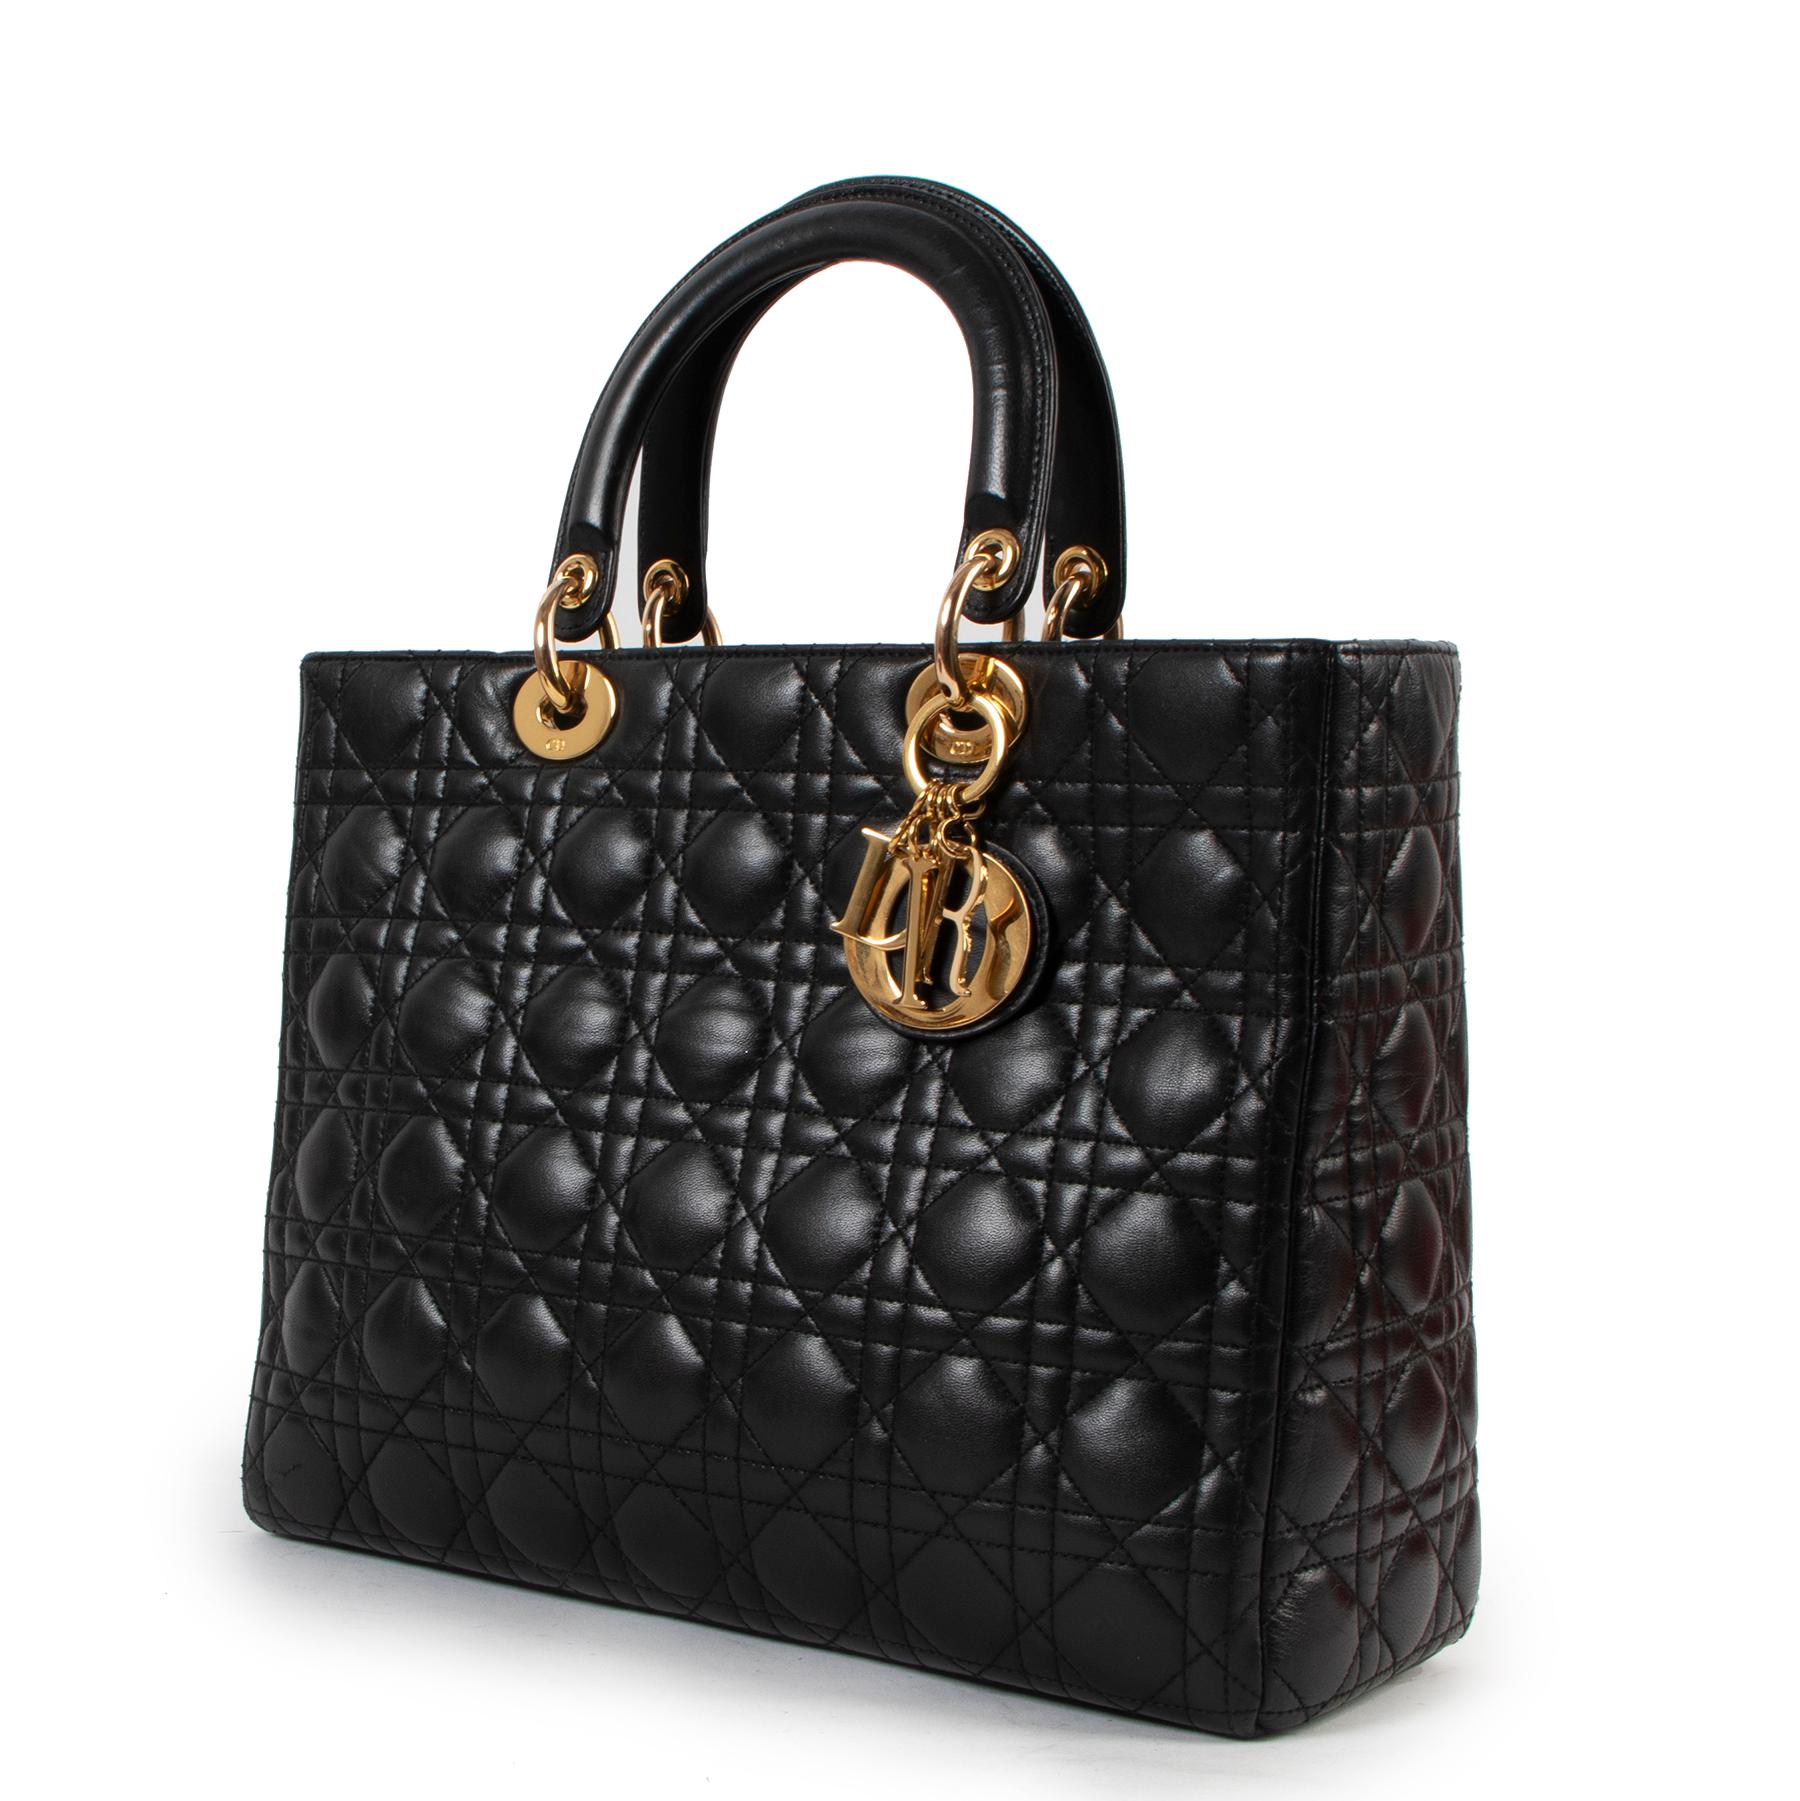 Christian Dior Black Large Lady Dior Cannage Lambskin Bag

Always dreamed of owning a Christian Dior Black Lady Dior Bag? It's your chance! The iconic bag matches every fashionista's outfit and is a true luxurious item. It is carried in the hand or